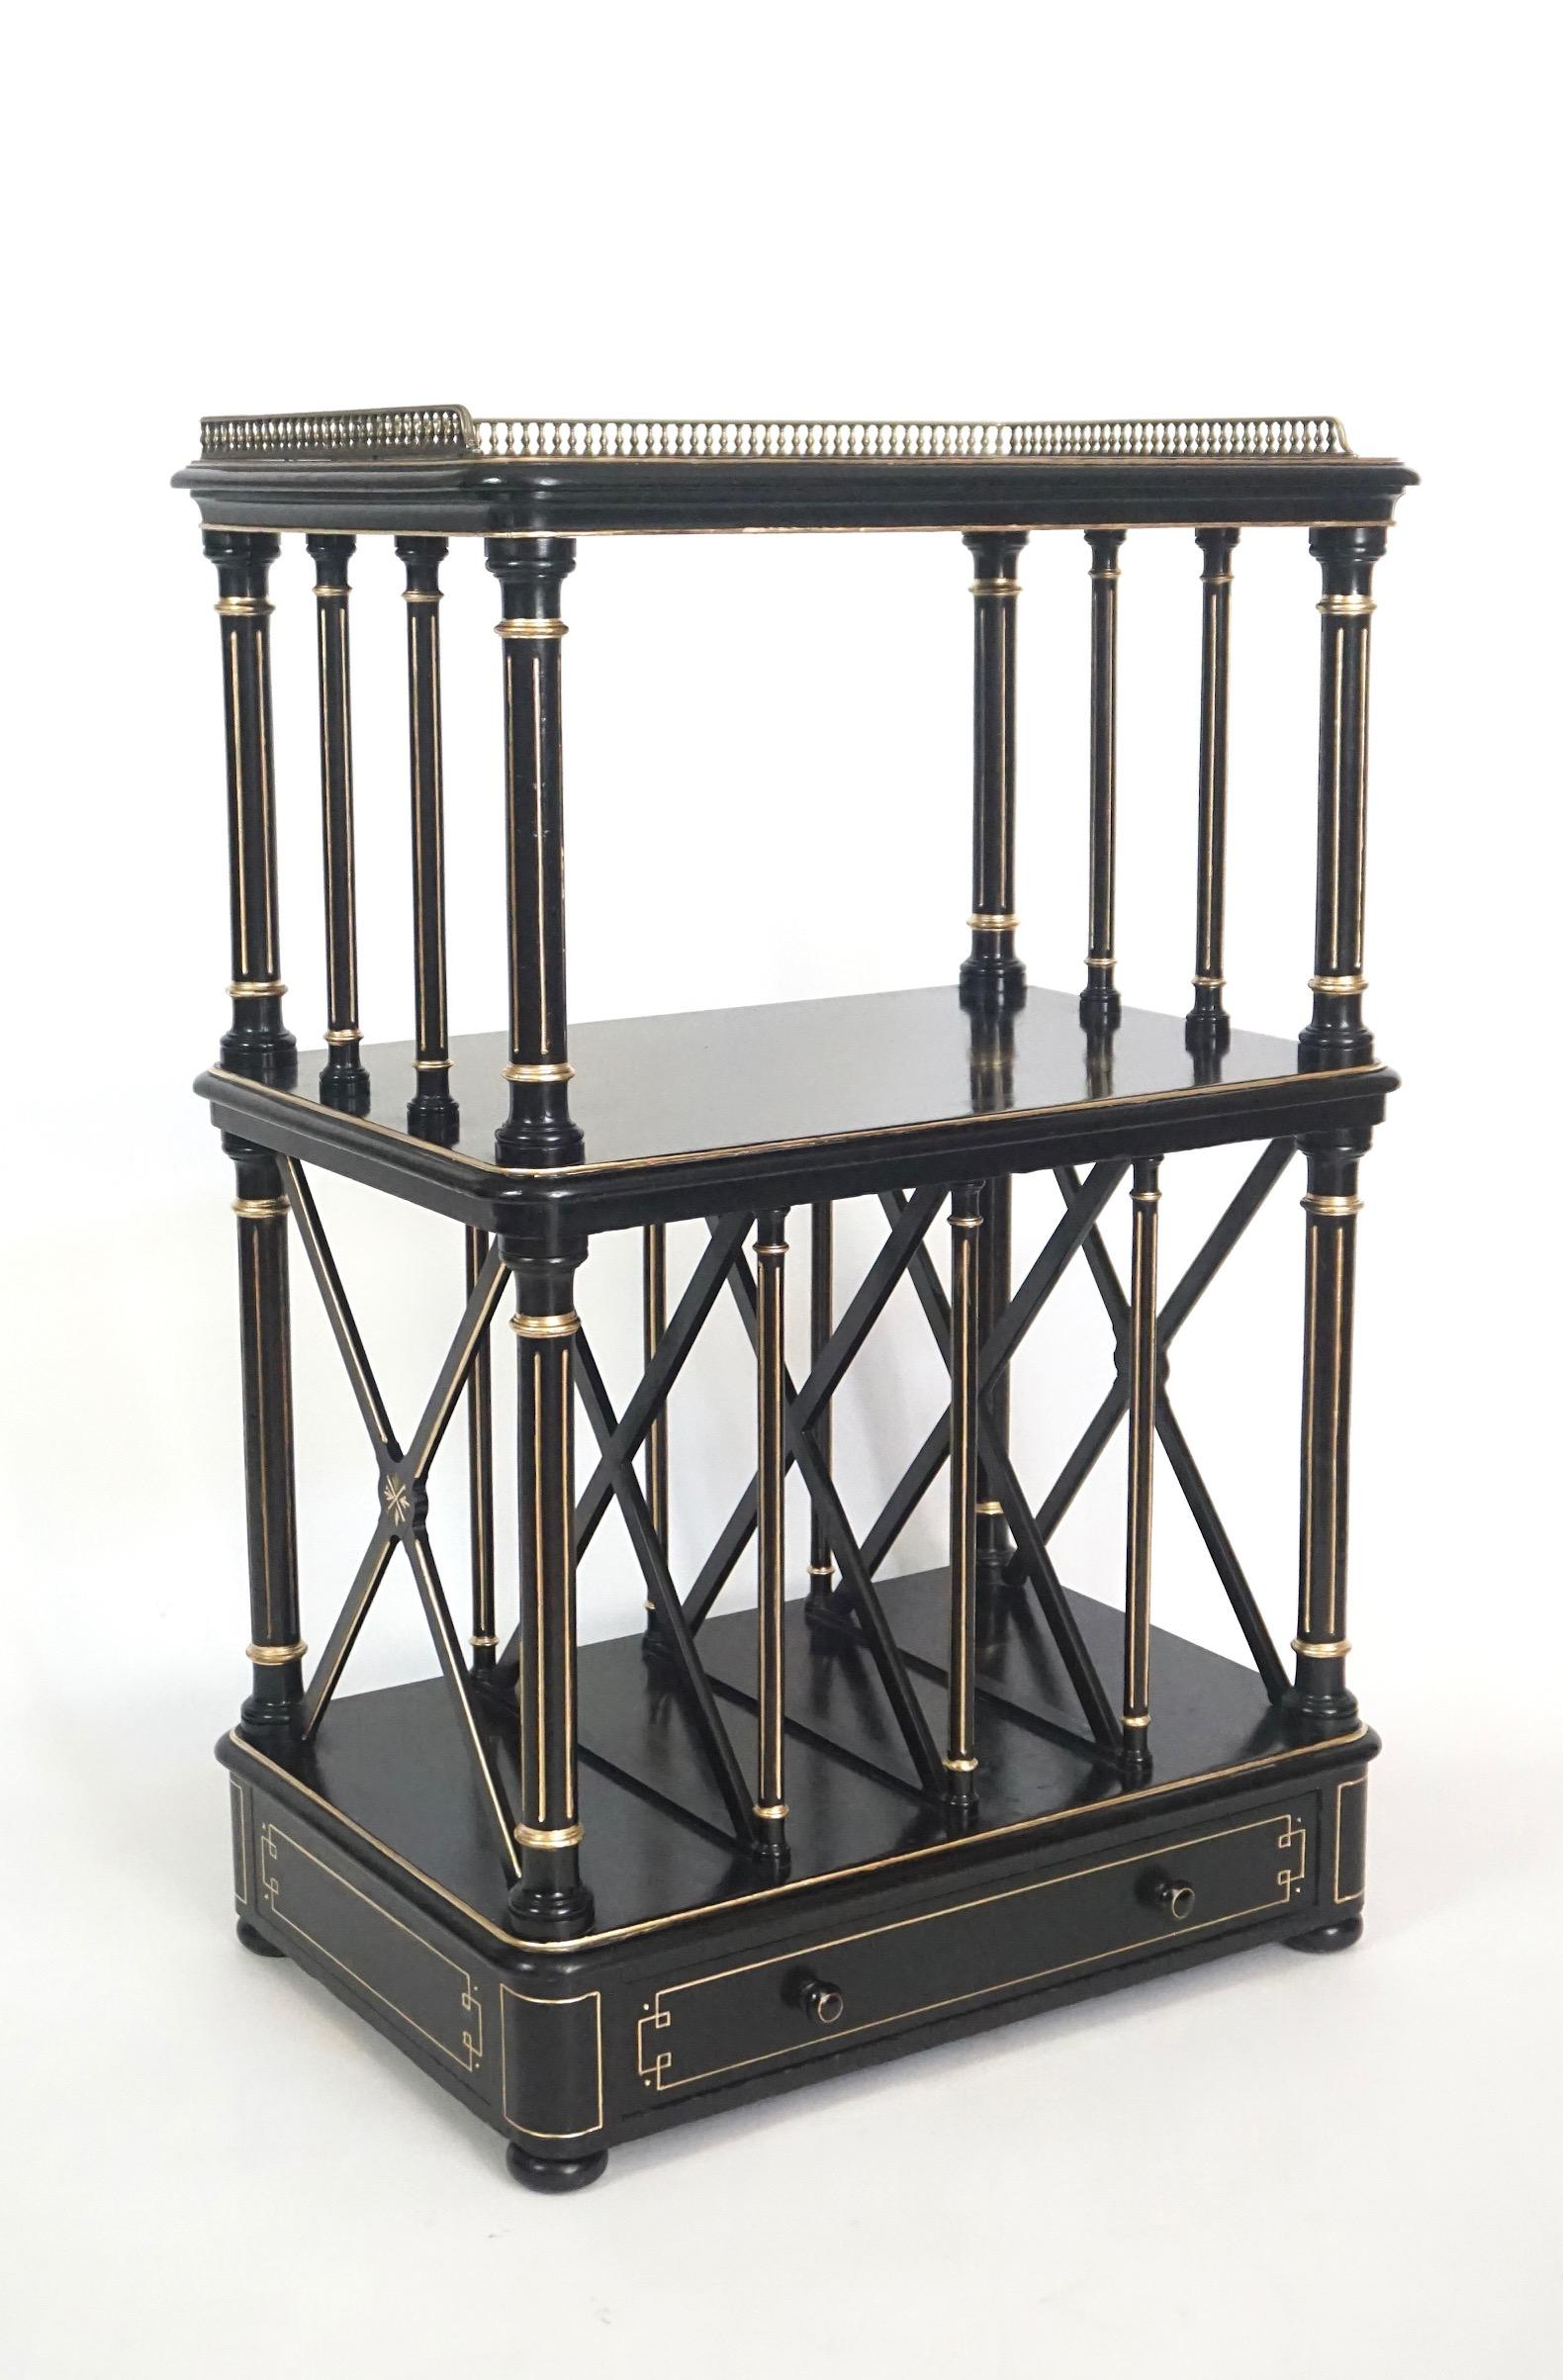 A chic circa 1875 English Aesthetic Movement period ebonized and parcel gilt étagère of three tier form, the top shelf with brass 'baluster' gallery above fluted colonette supported second open tier and lower 'Canterbury' tier with X-form dividers